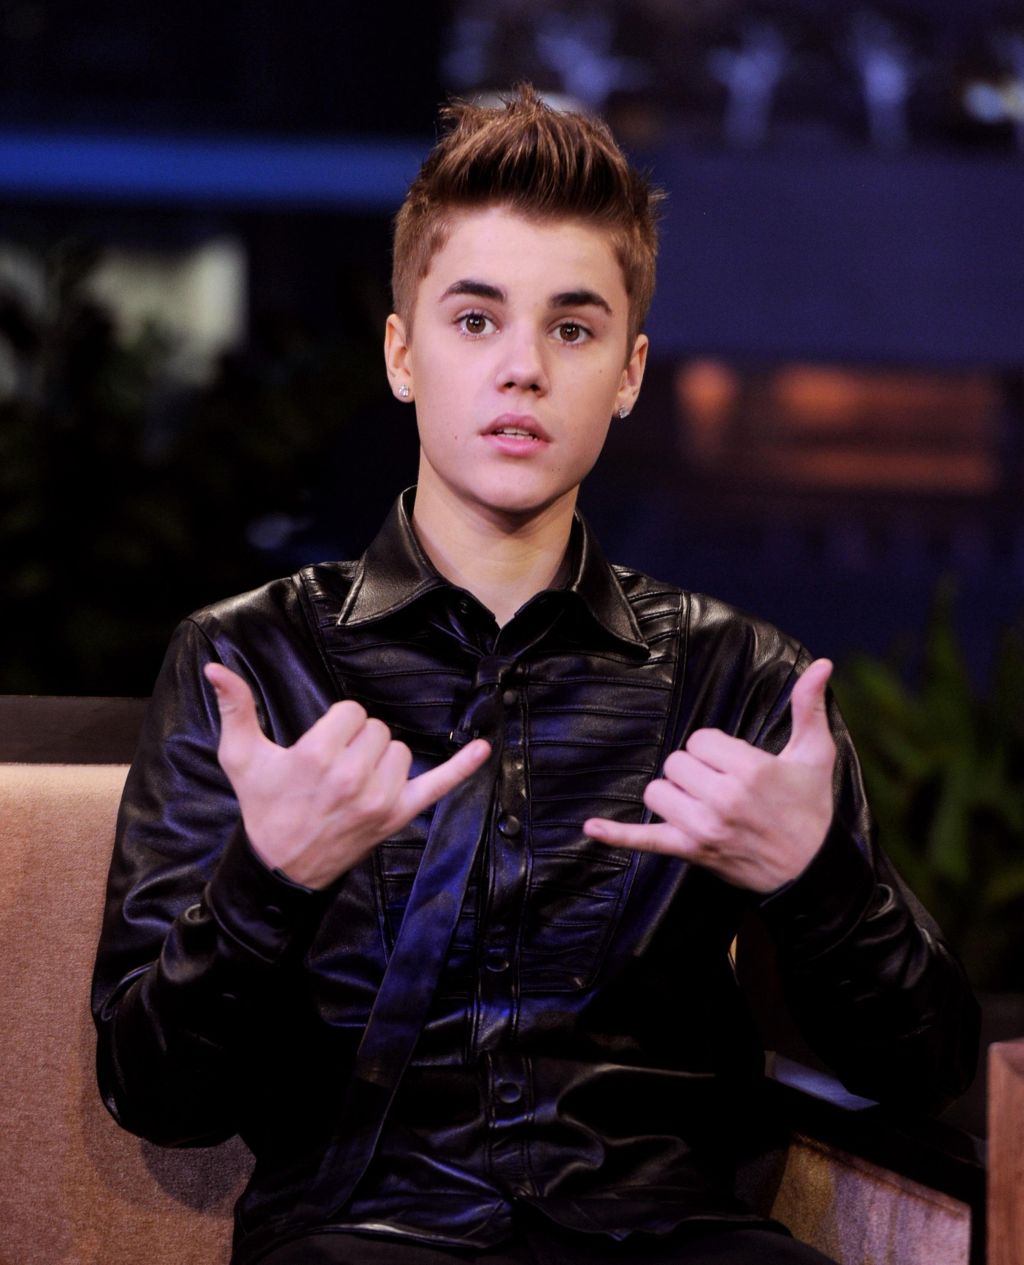 Justin Bieber And David Freese On 'The Tonight Show With Jay Leno'